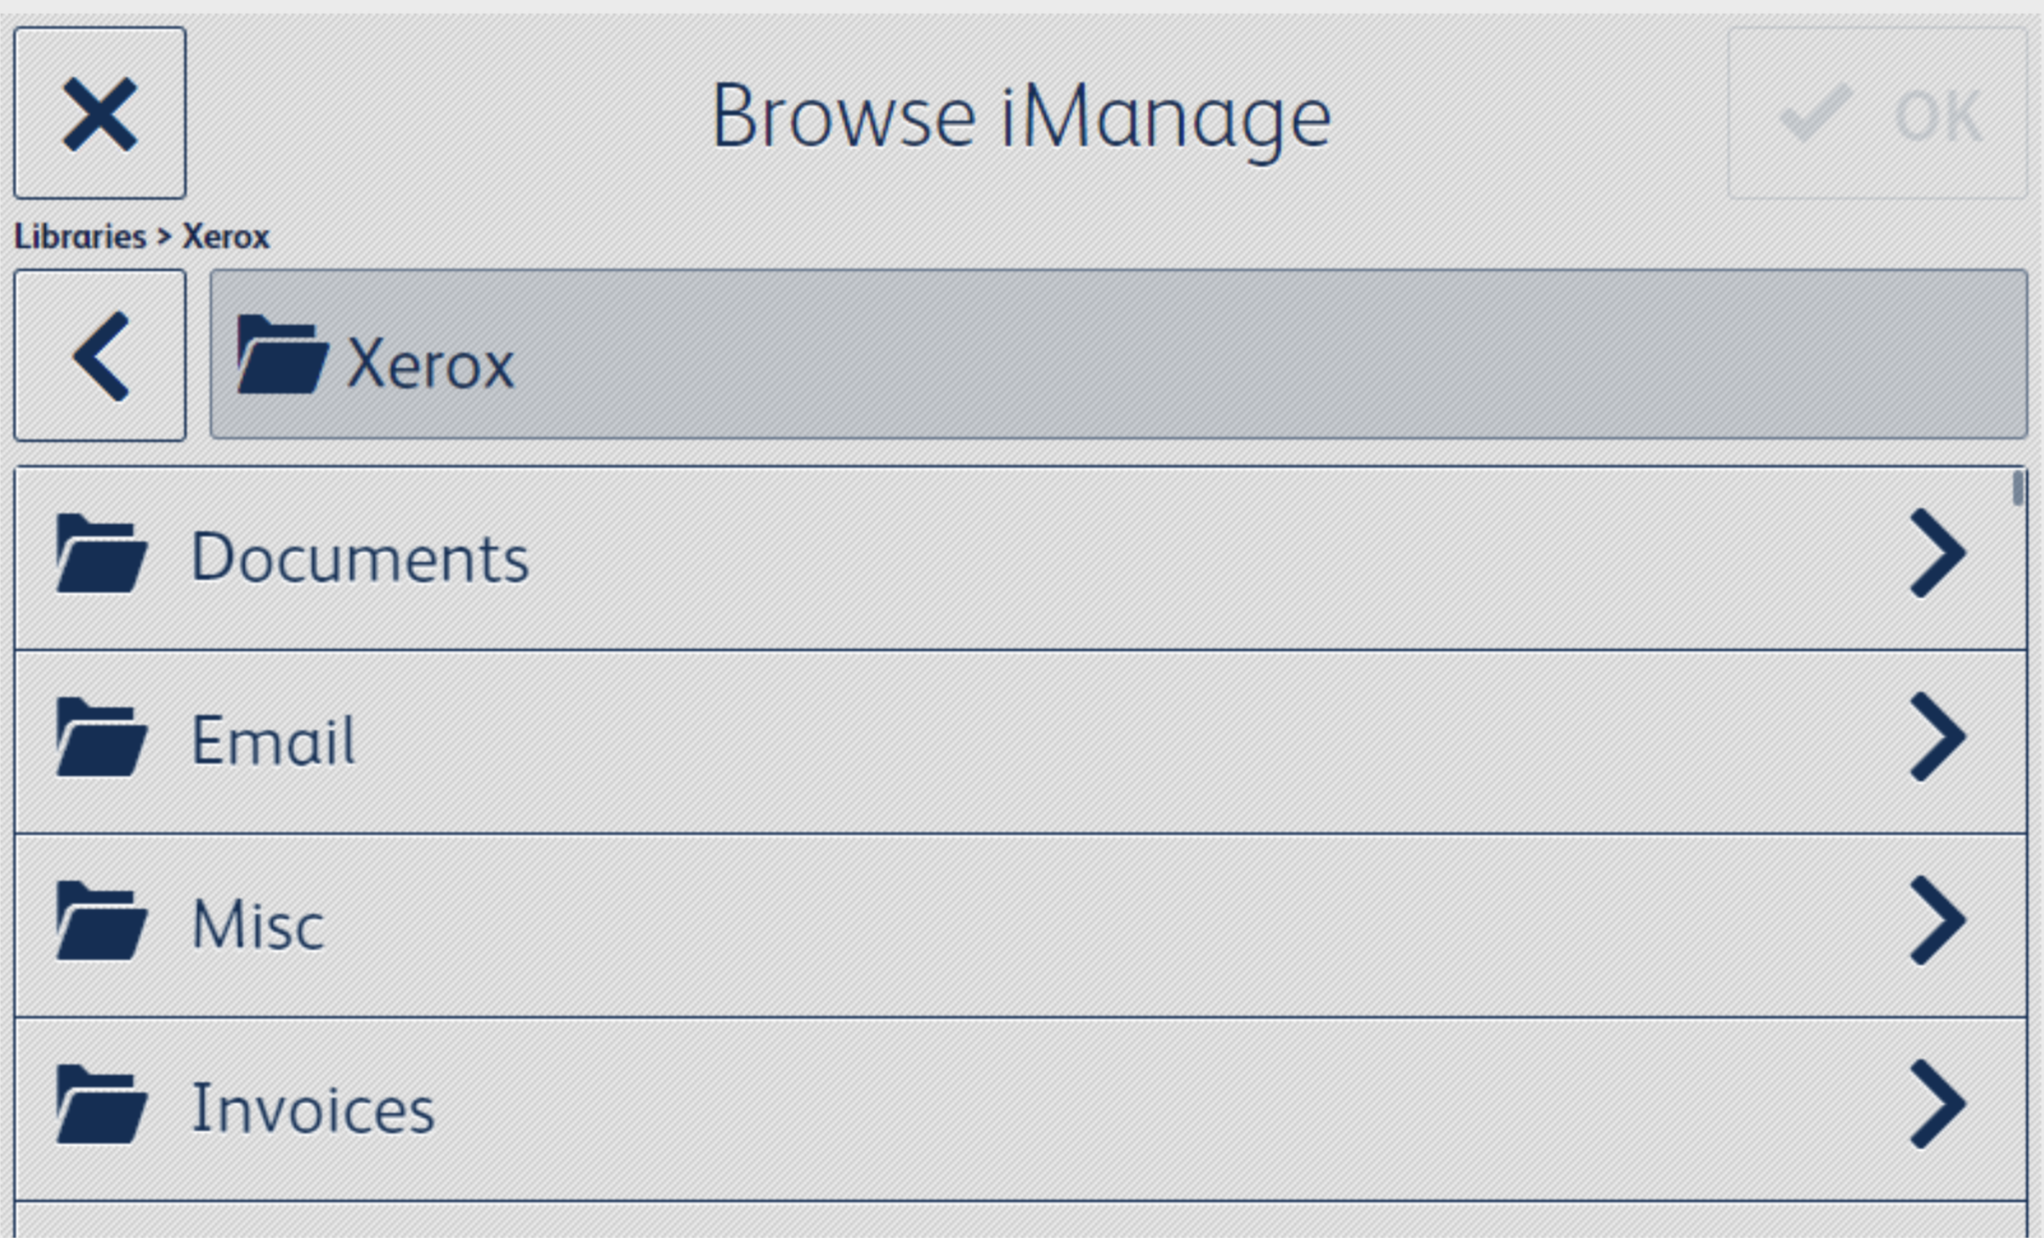 Xerox Connect to iManage